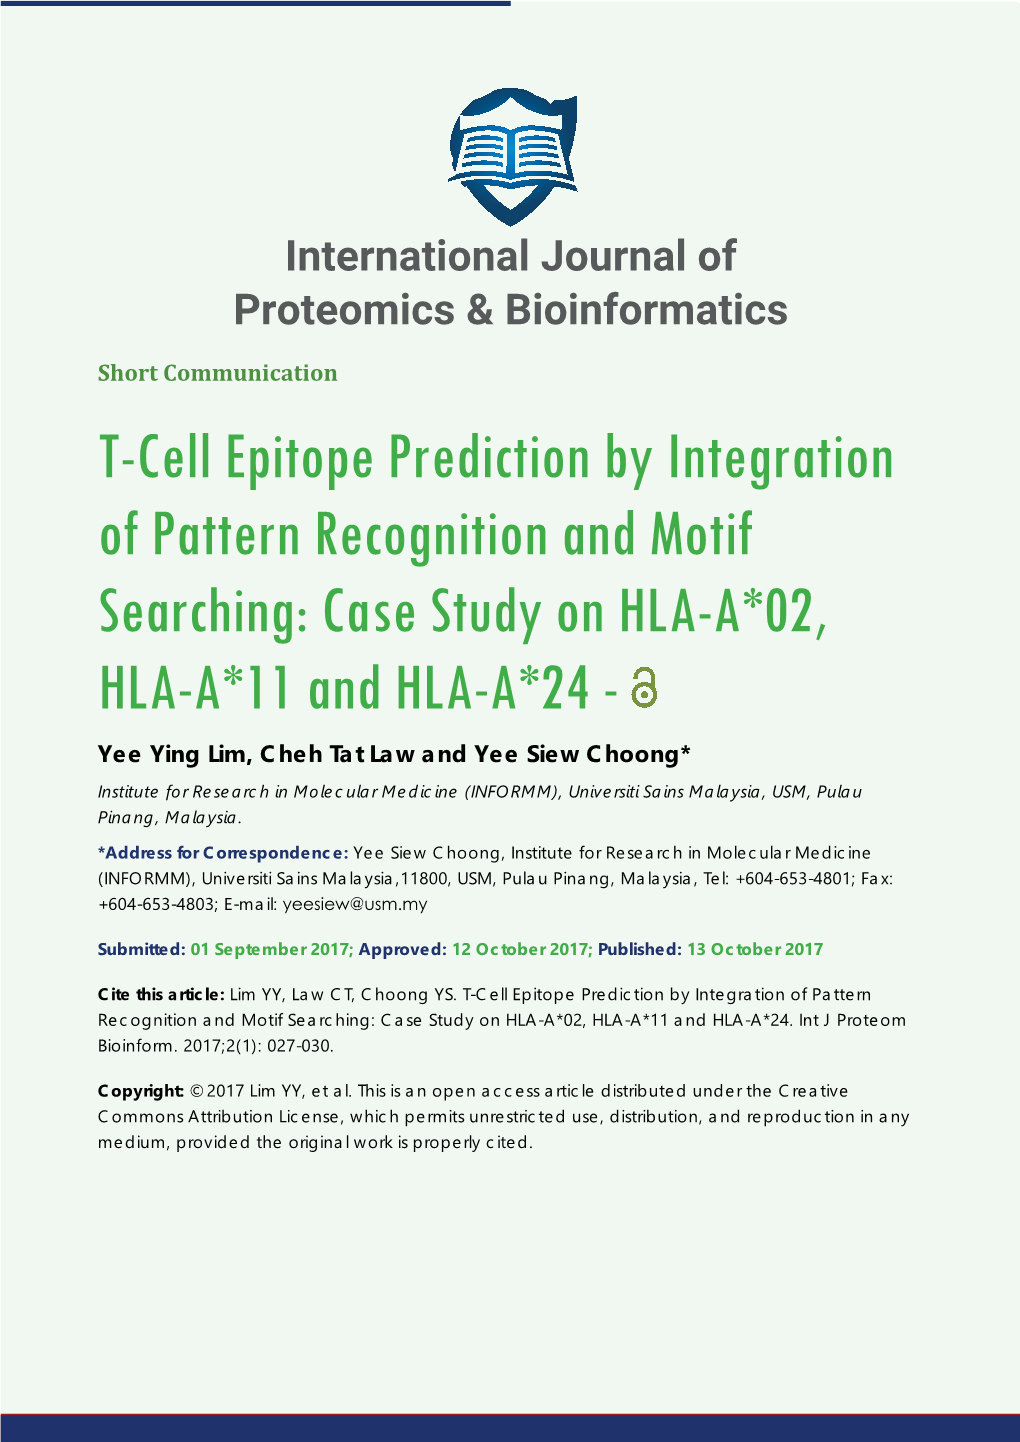 T-Cell Epitope Prediction by Integration